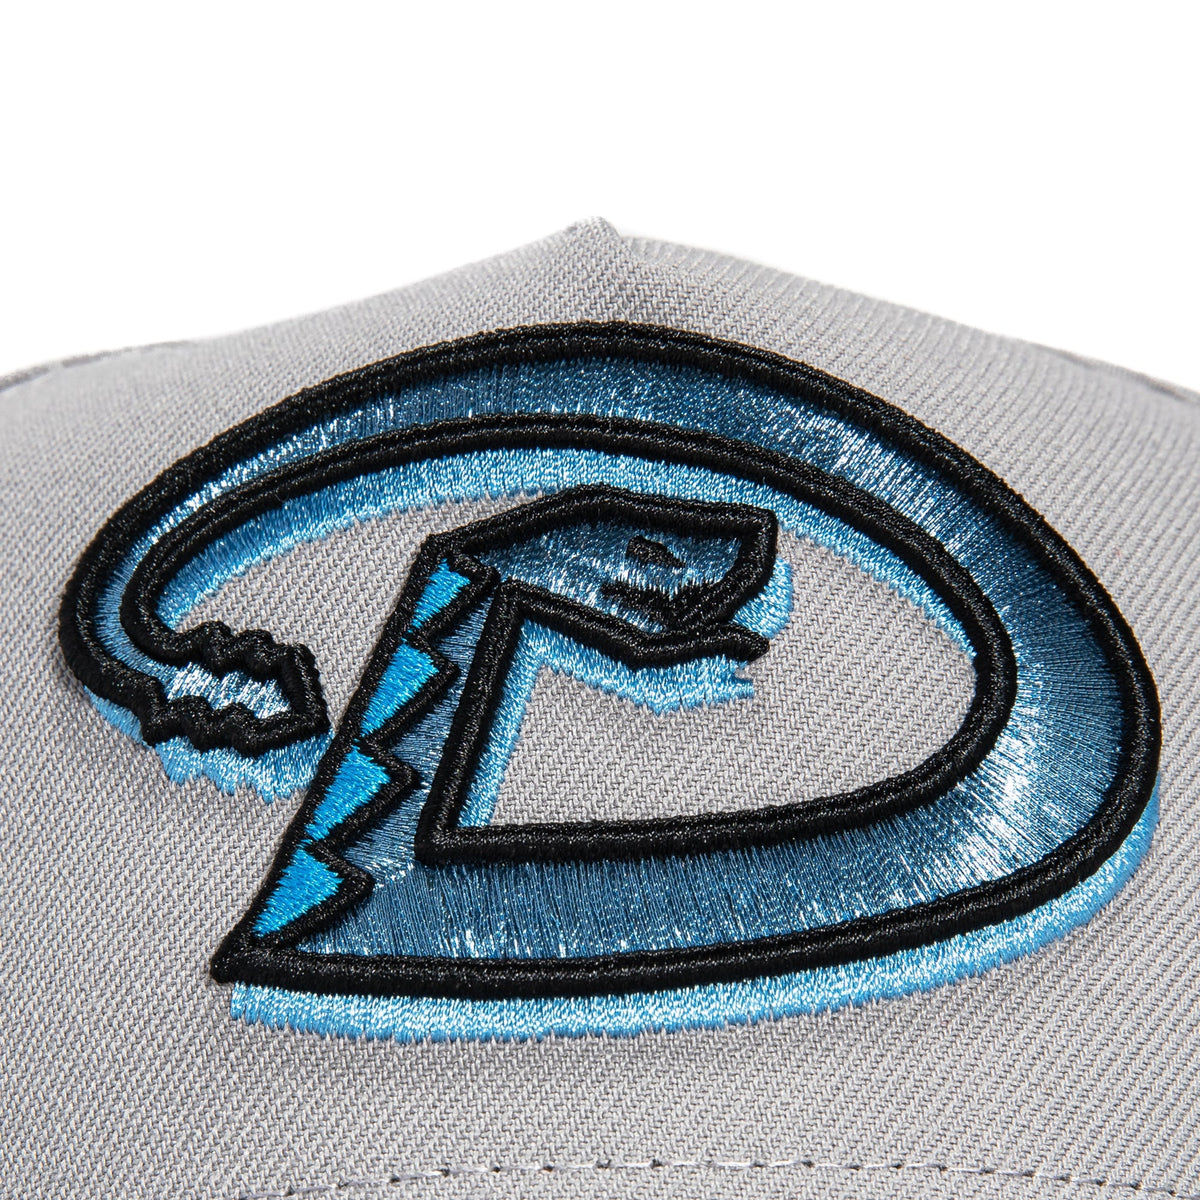 https://www.thewatchoutlets.shop/wp-content/uploads/1691/15/new-era-9forty-a-frame-arizona-diamondbacks-inaugural-patch-light-blue-uv-snapback-d-hat-grey-new-era-shop-online-we-have-what-youre-searching-for_2.jpg